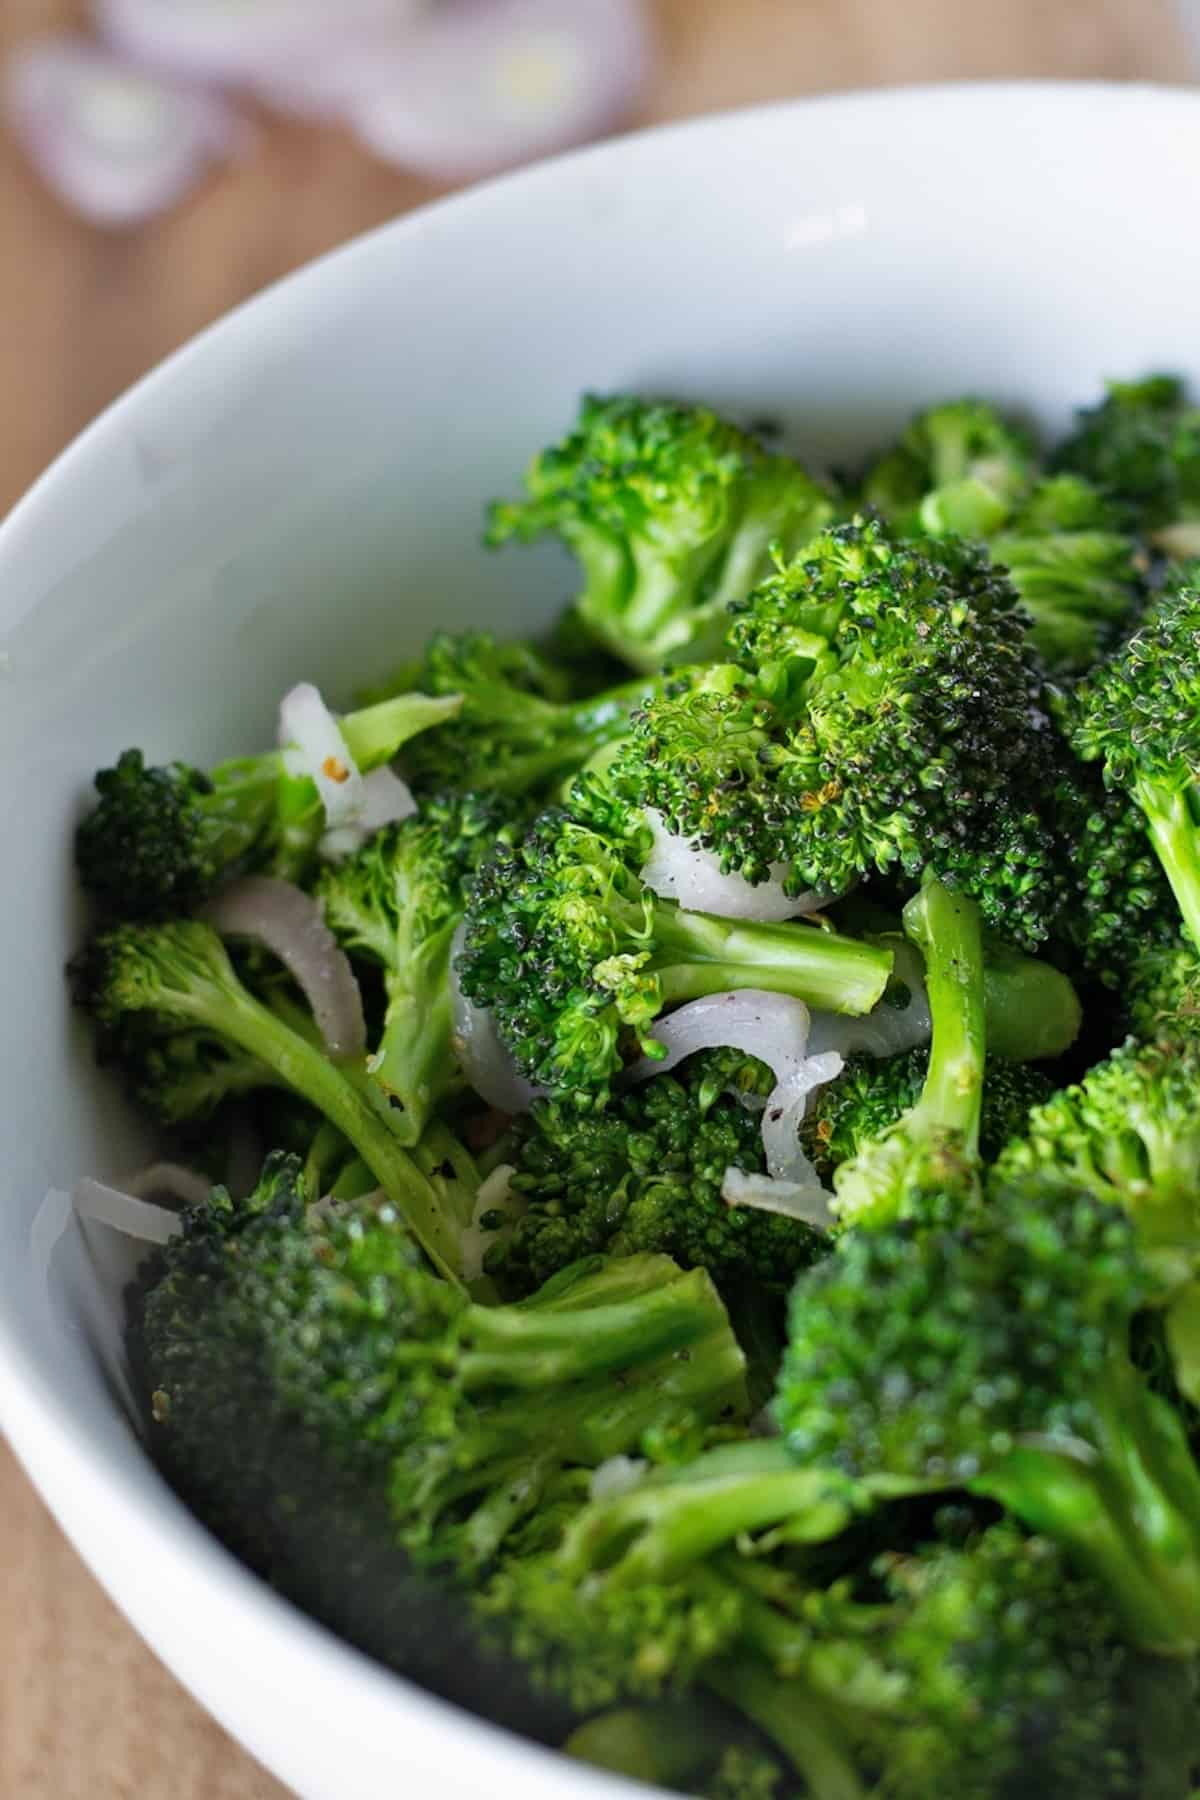 Garlic roasted broccoli is a tasty side dish and perfect for Whole30 and Paleo lifestyles.  